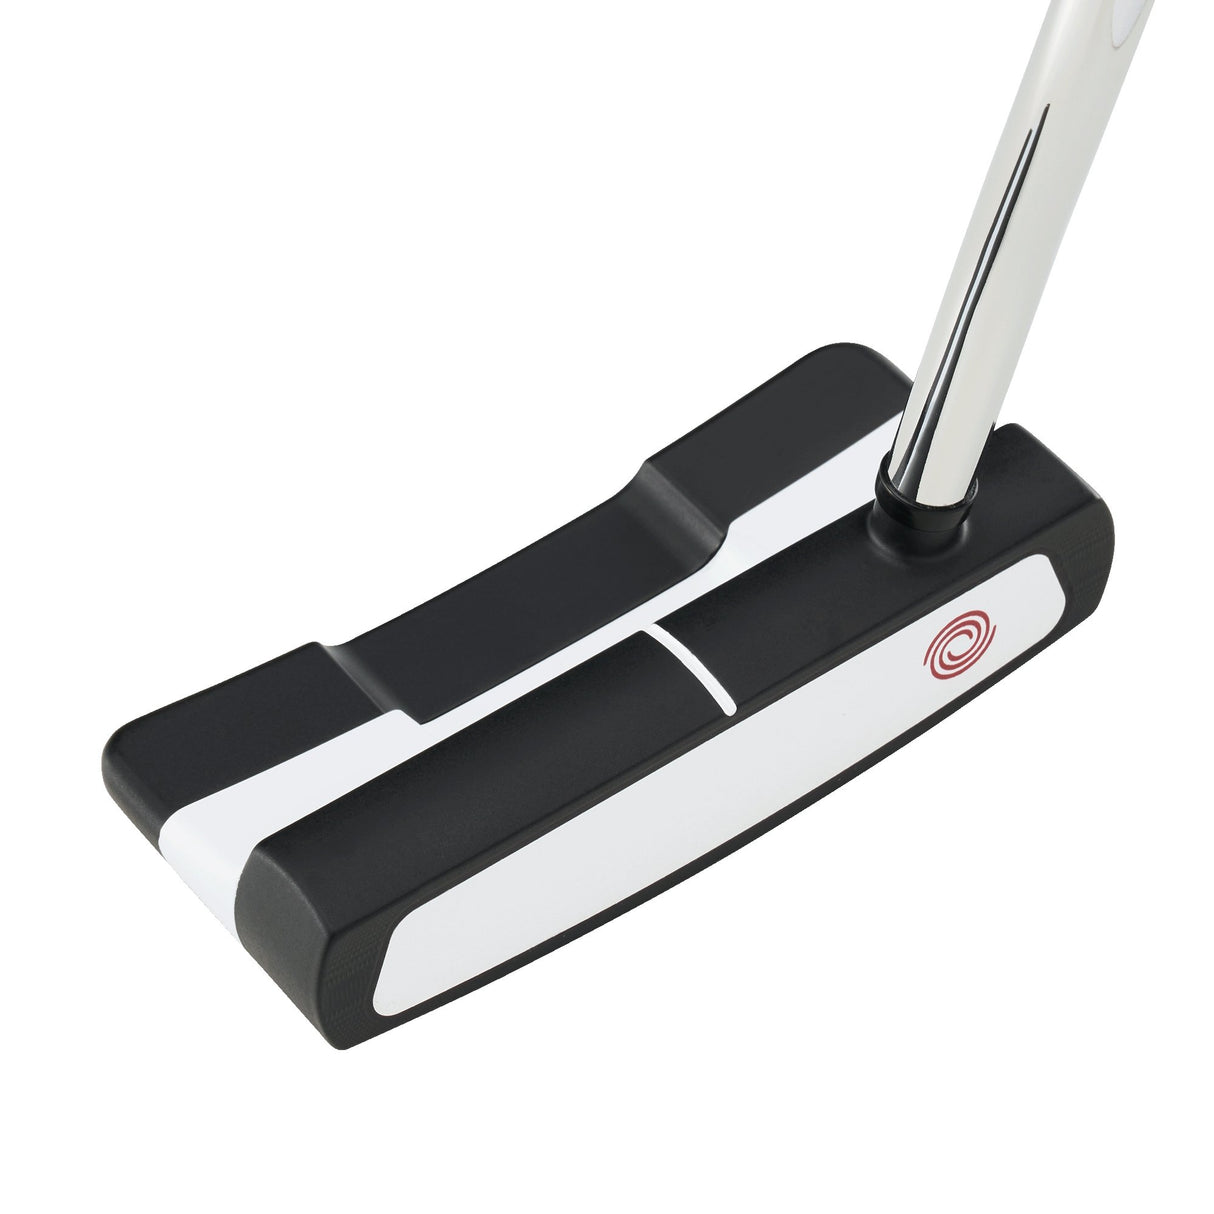 Demo Model Odyssey White Hot Versa Double Wide Putter